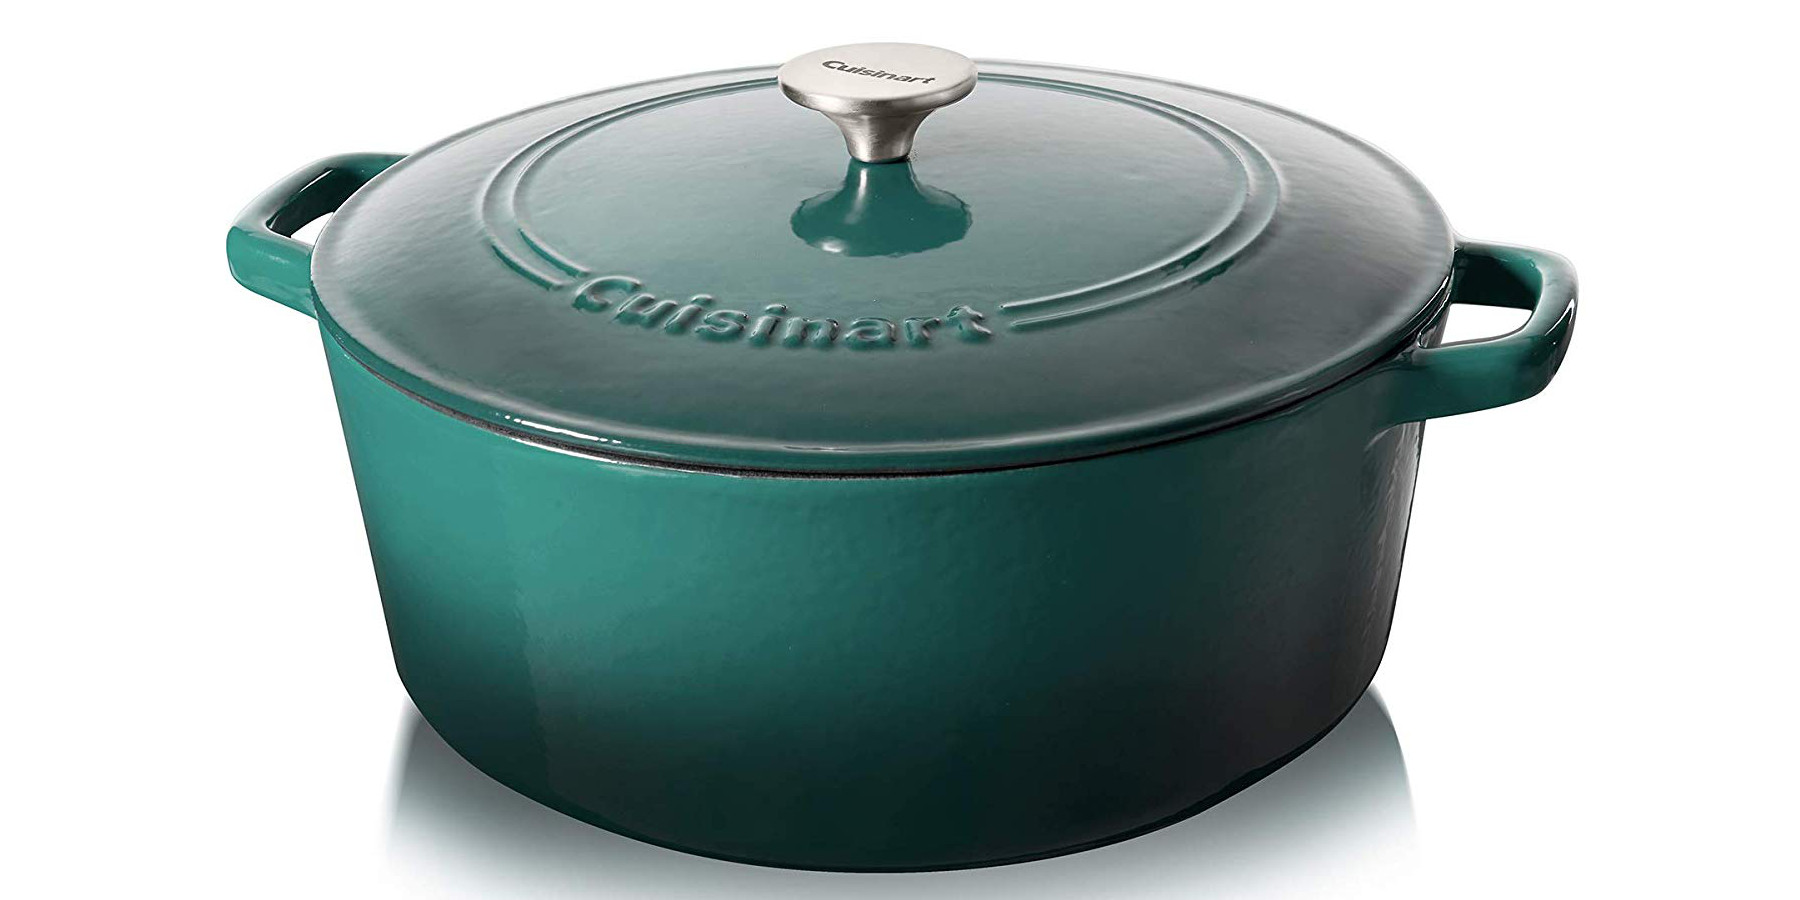 Cuisinart cast iron 7-Qt. round casserole now $60 for today only (Reg.  $100+)